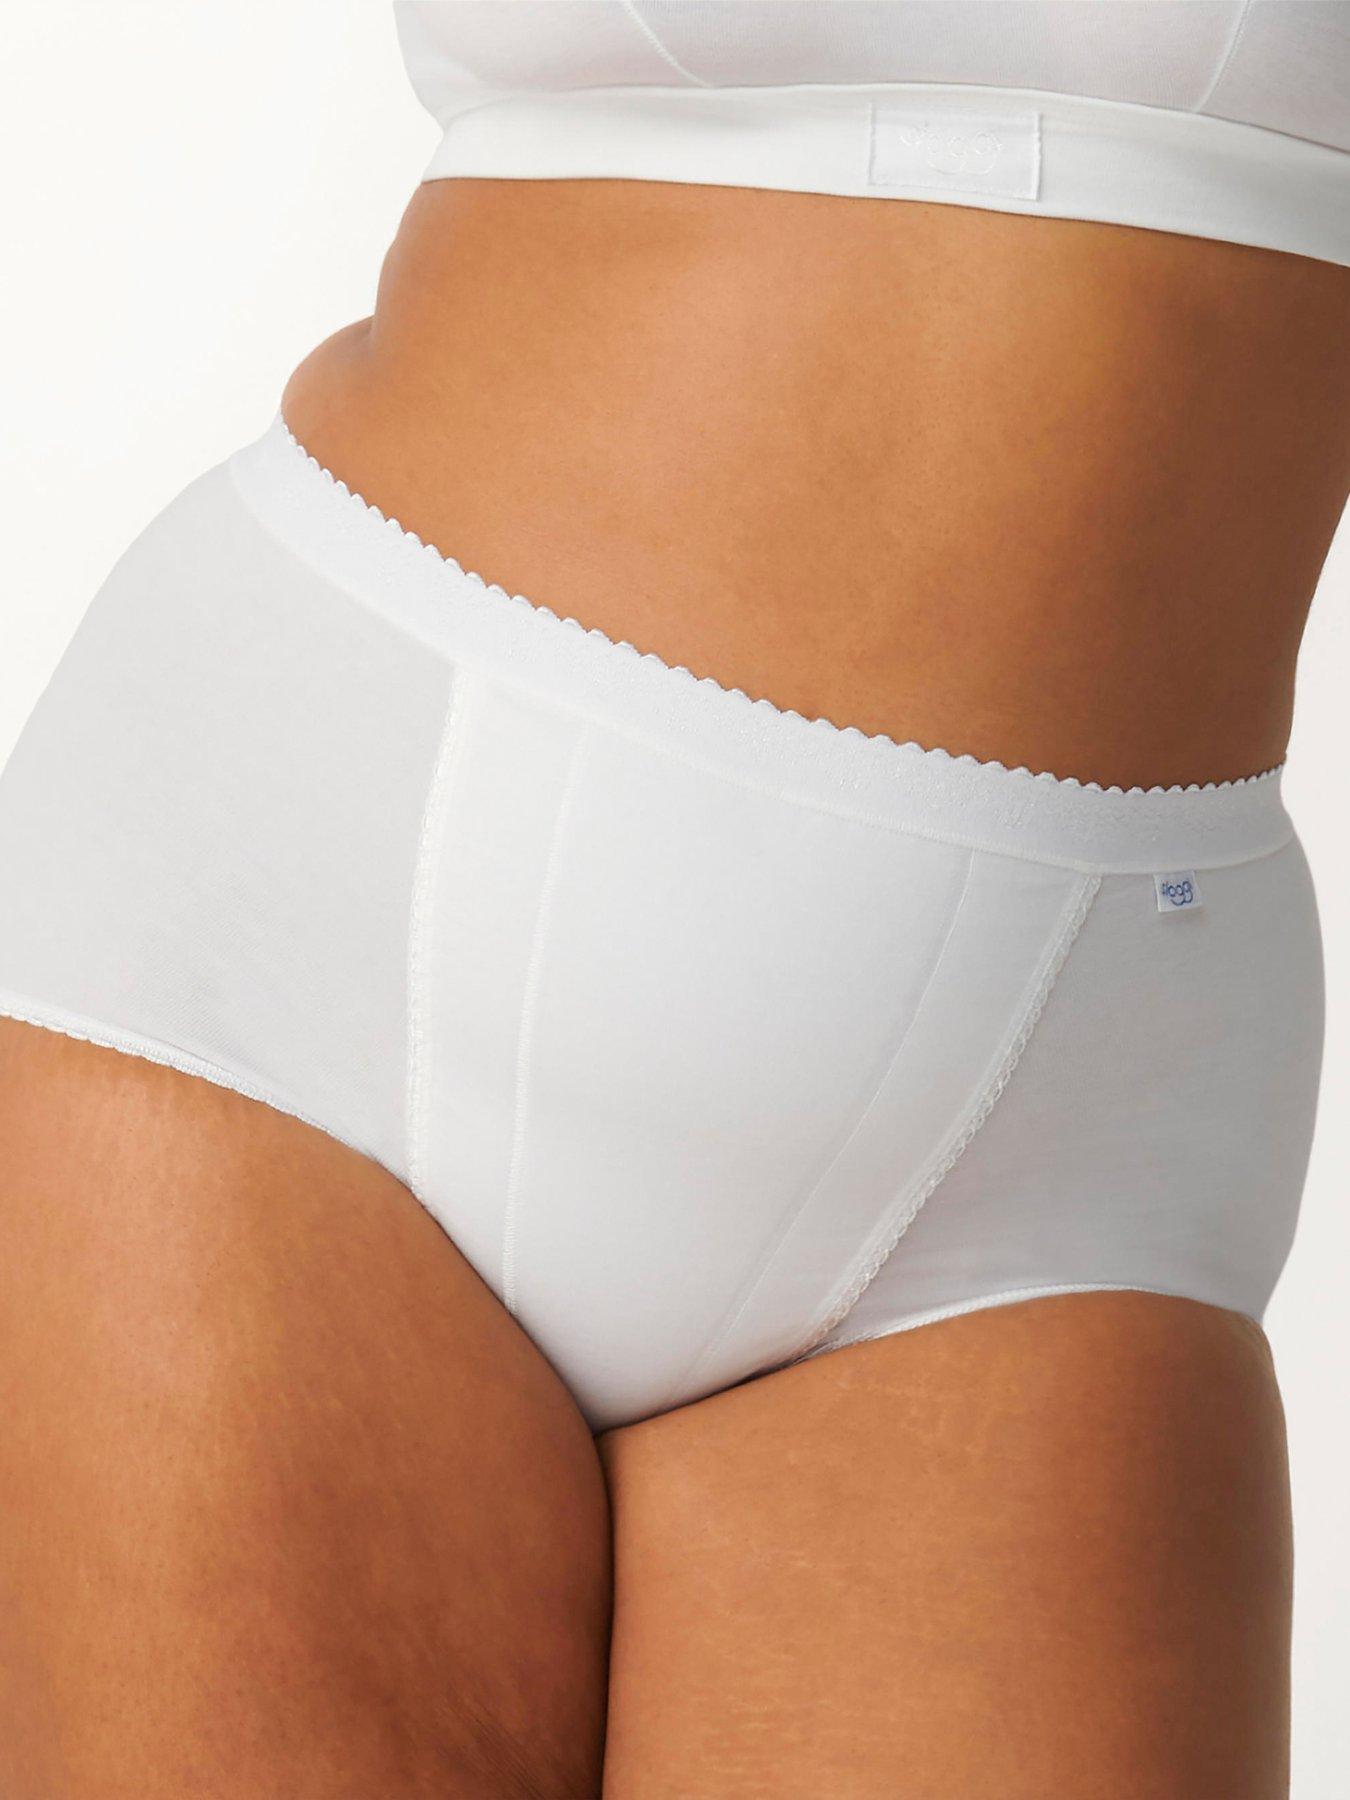 Details about   Sloggi underwear Basic Long Briefs control shaping knickers womens intimate 